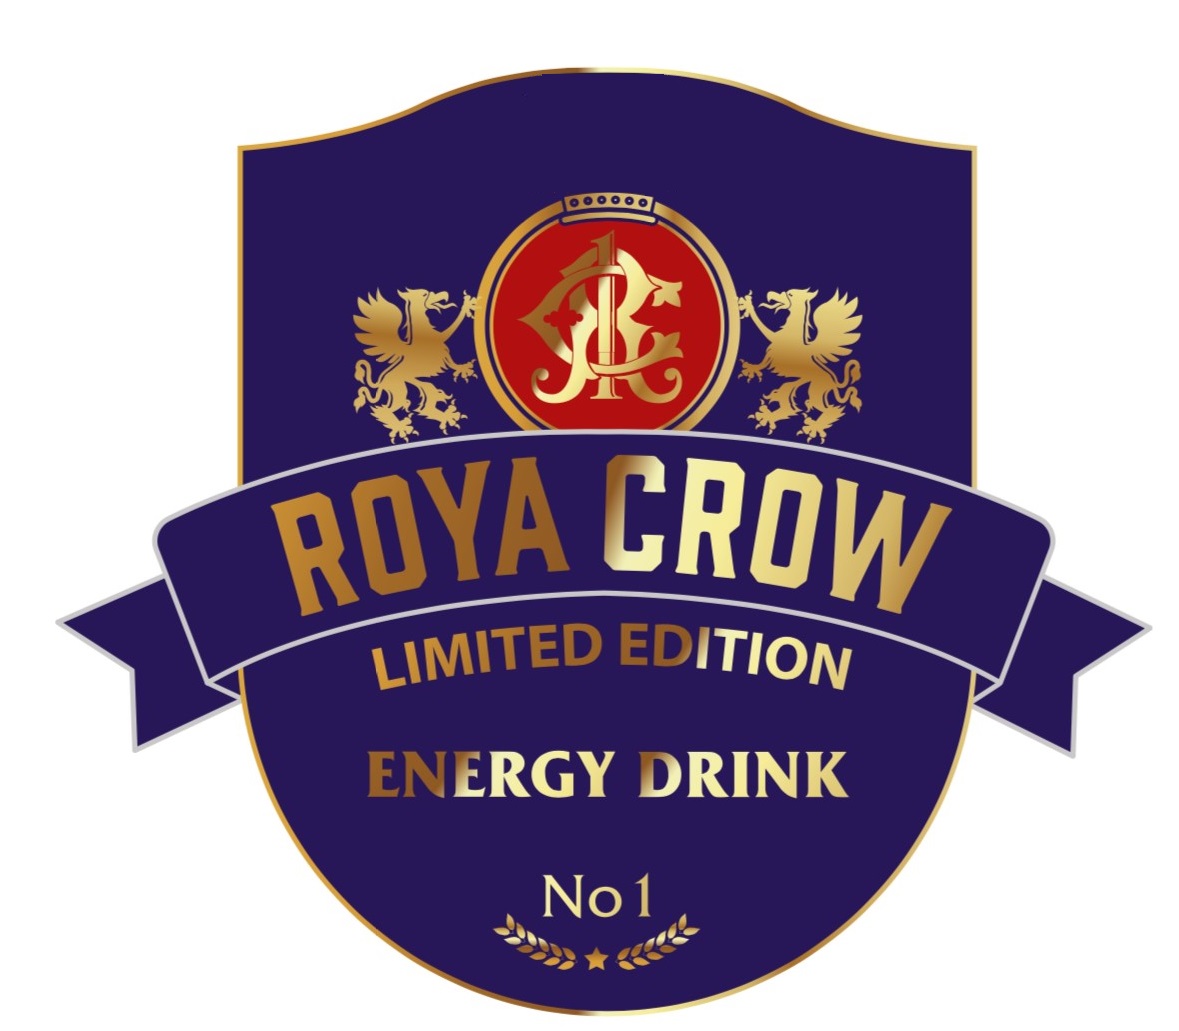 RC1 ROYA CROW LIMITED EDITION ENERGY DRINK No 1 